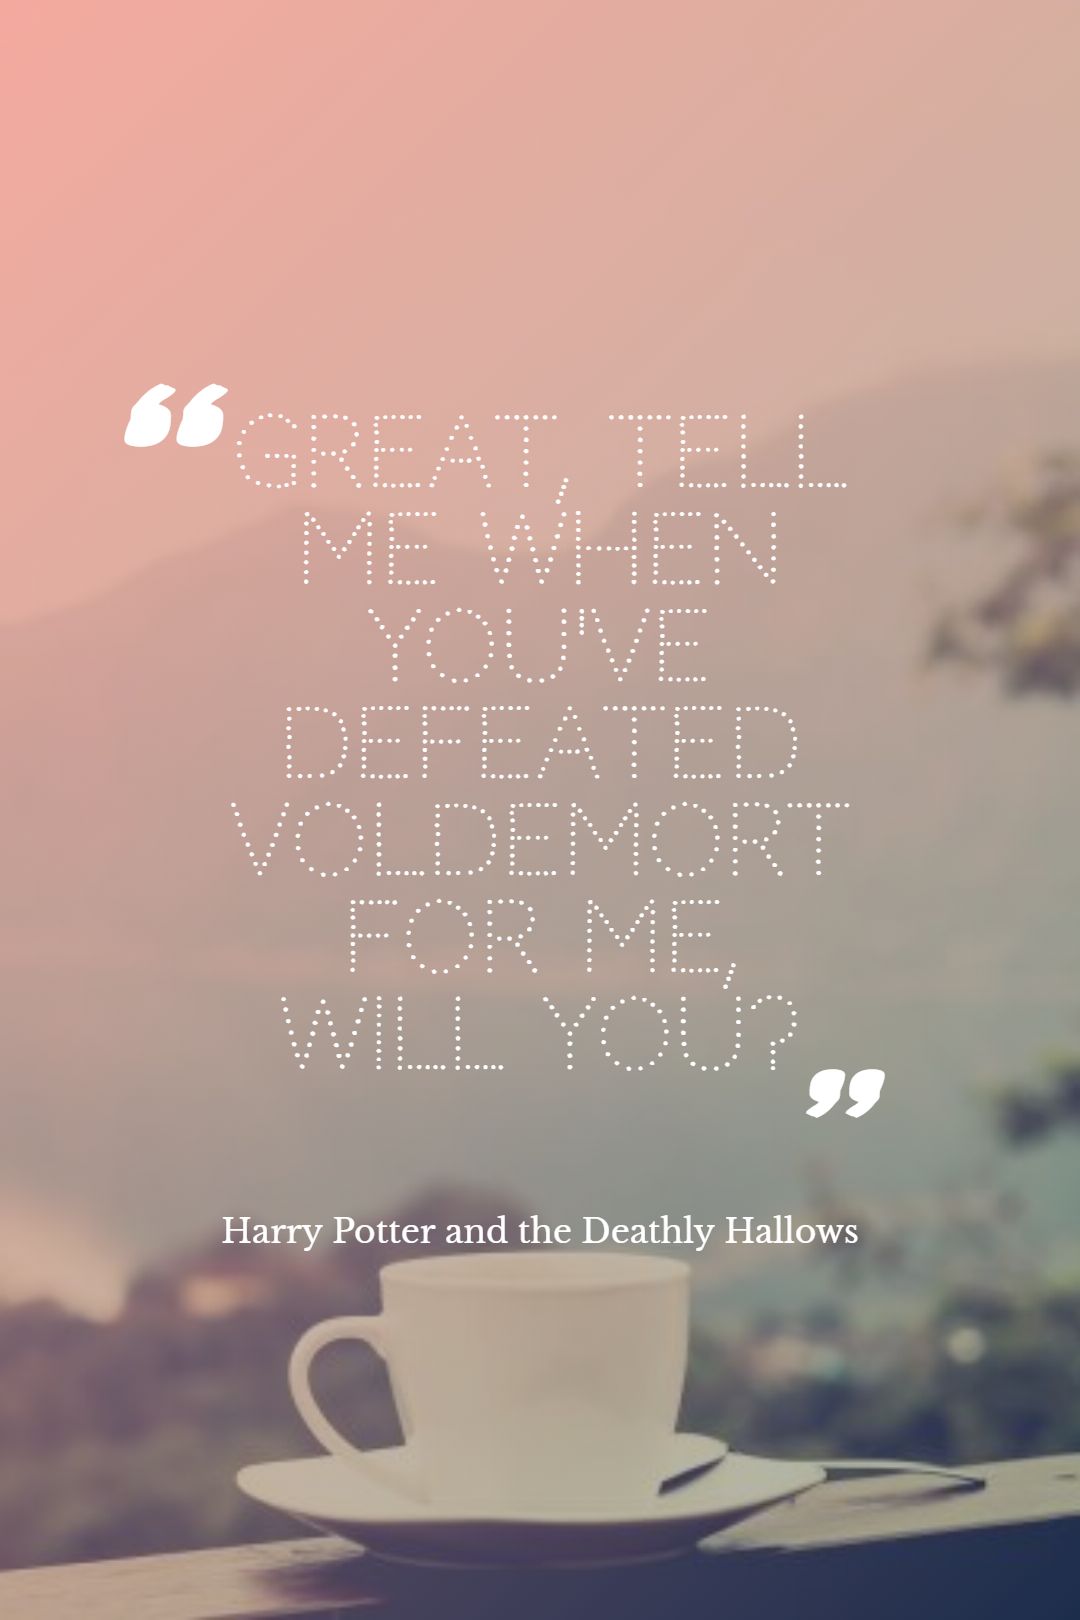 Great tell me when youve defeated Voldemort for me will you